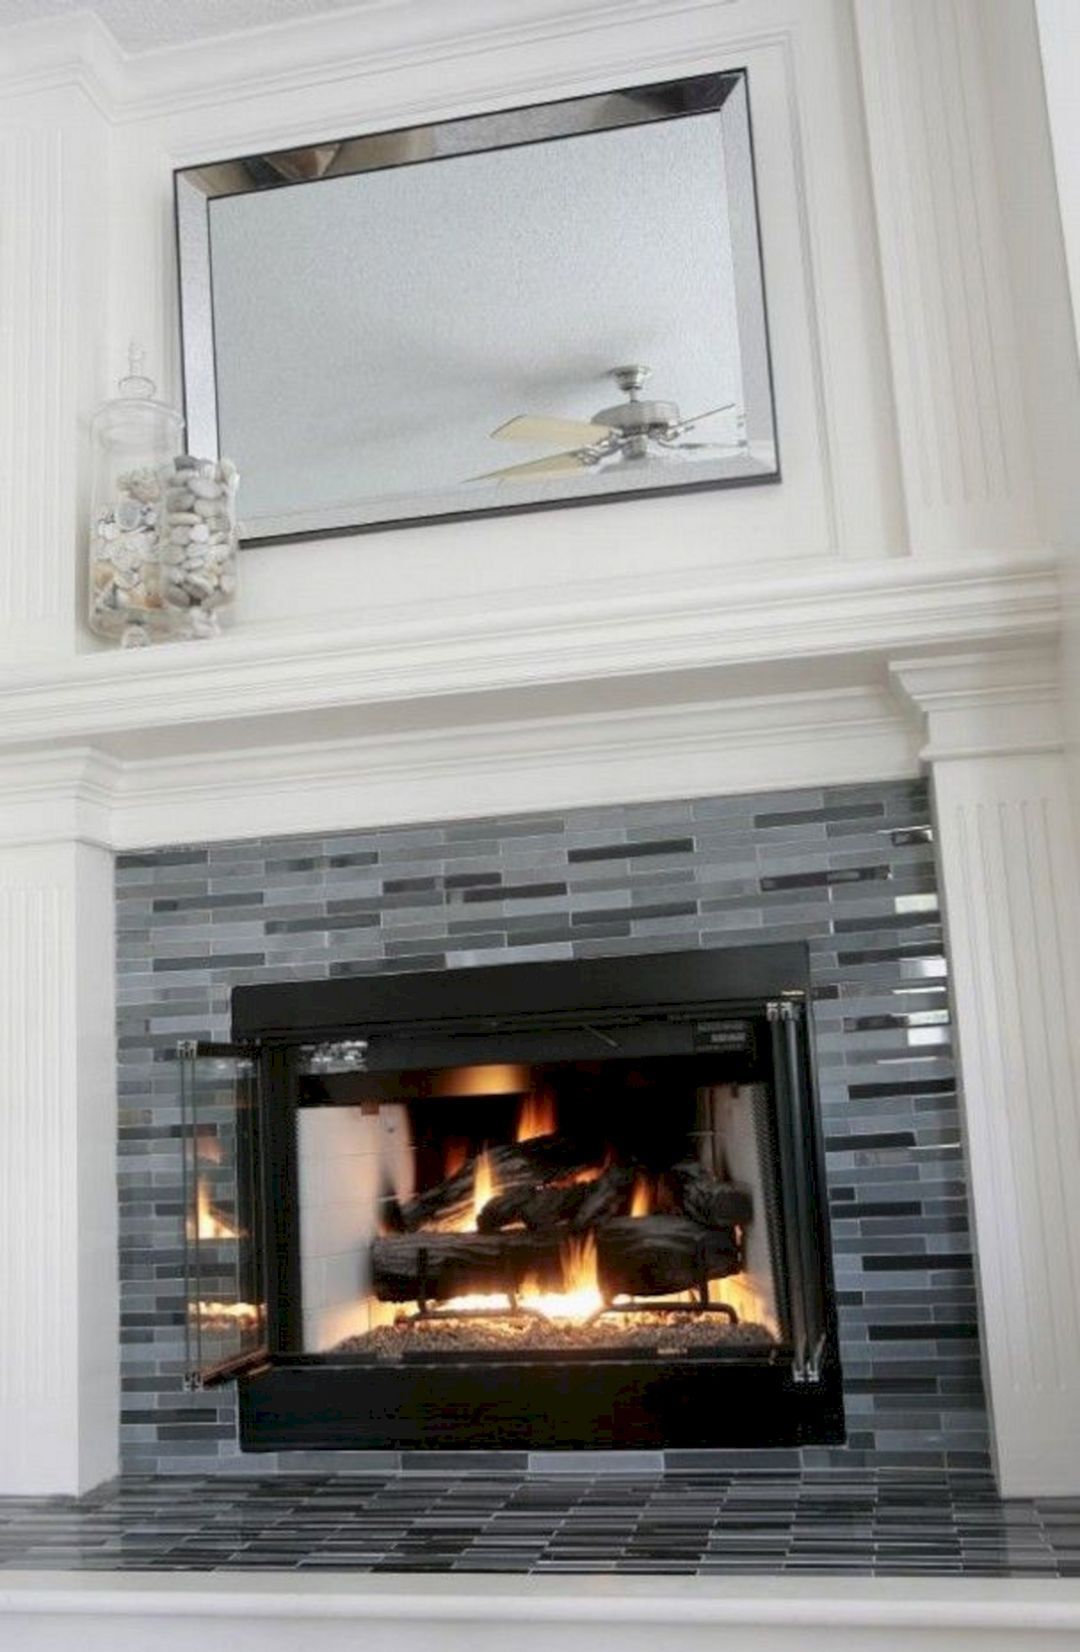 Tile Fireplace Mantel New 22 Wonderful Fireplace Tile Design for Amazing Home